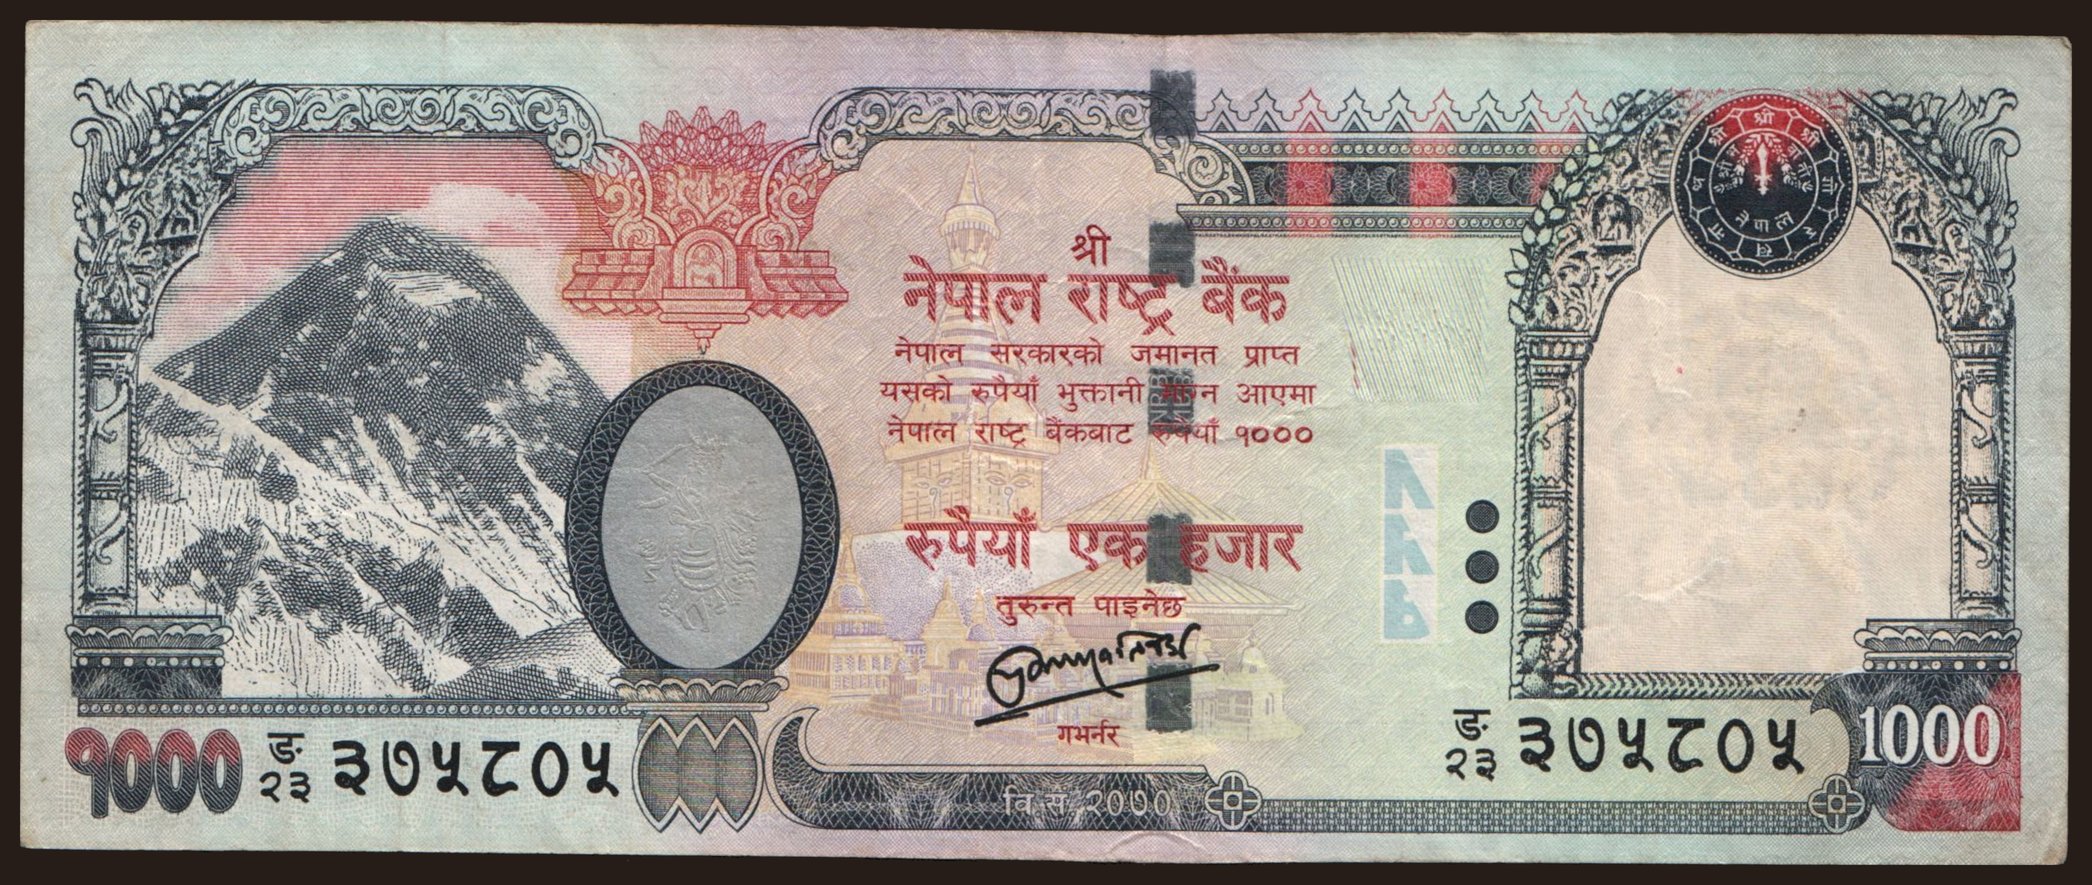 1000 rupees, 2013